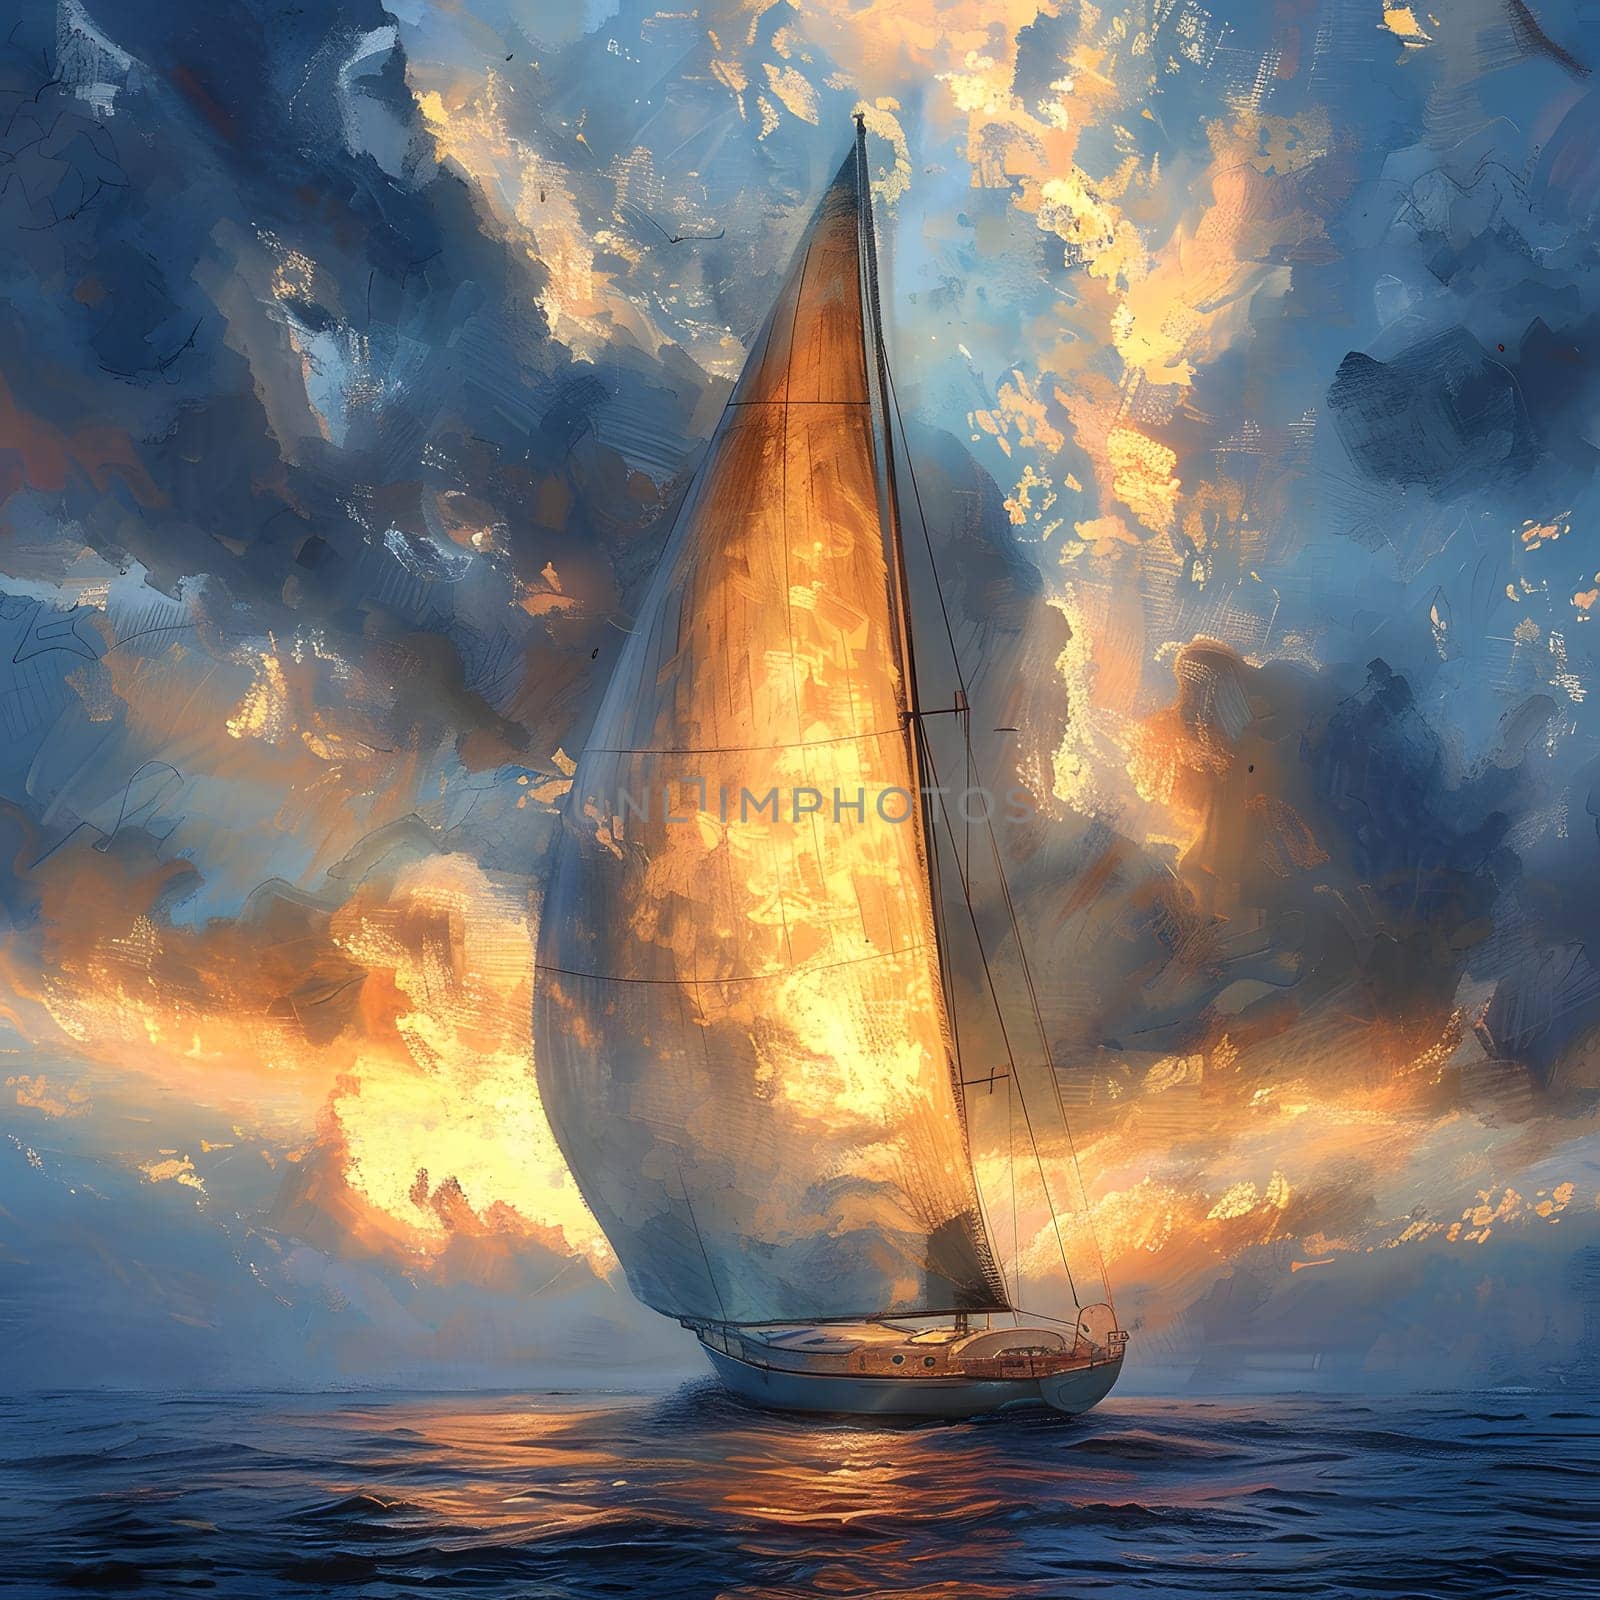 A vibrant painting captures a sailboat on the shimmering water at sunset. The colorful sky, fluffy clouds, and mast of the boat create a serene natural landscape